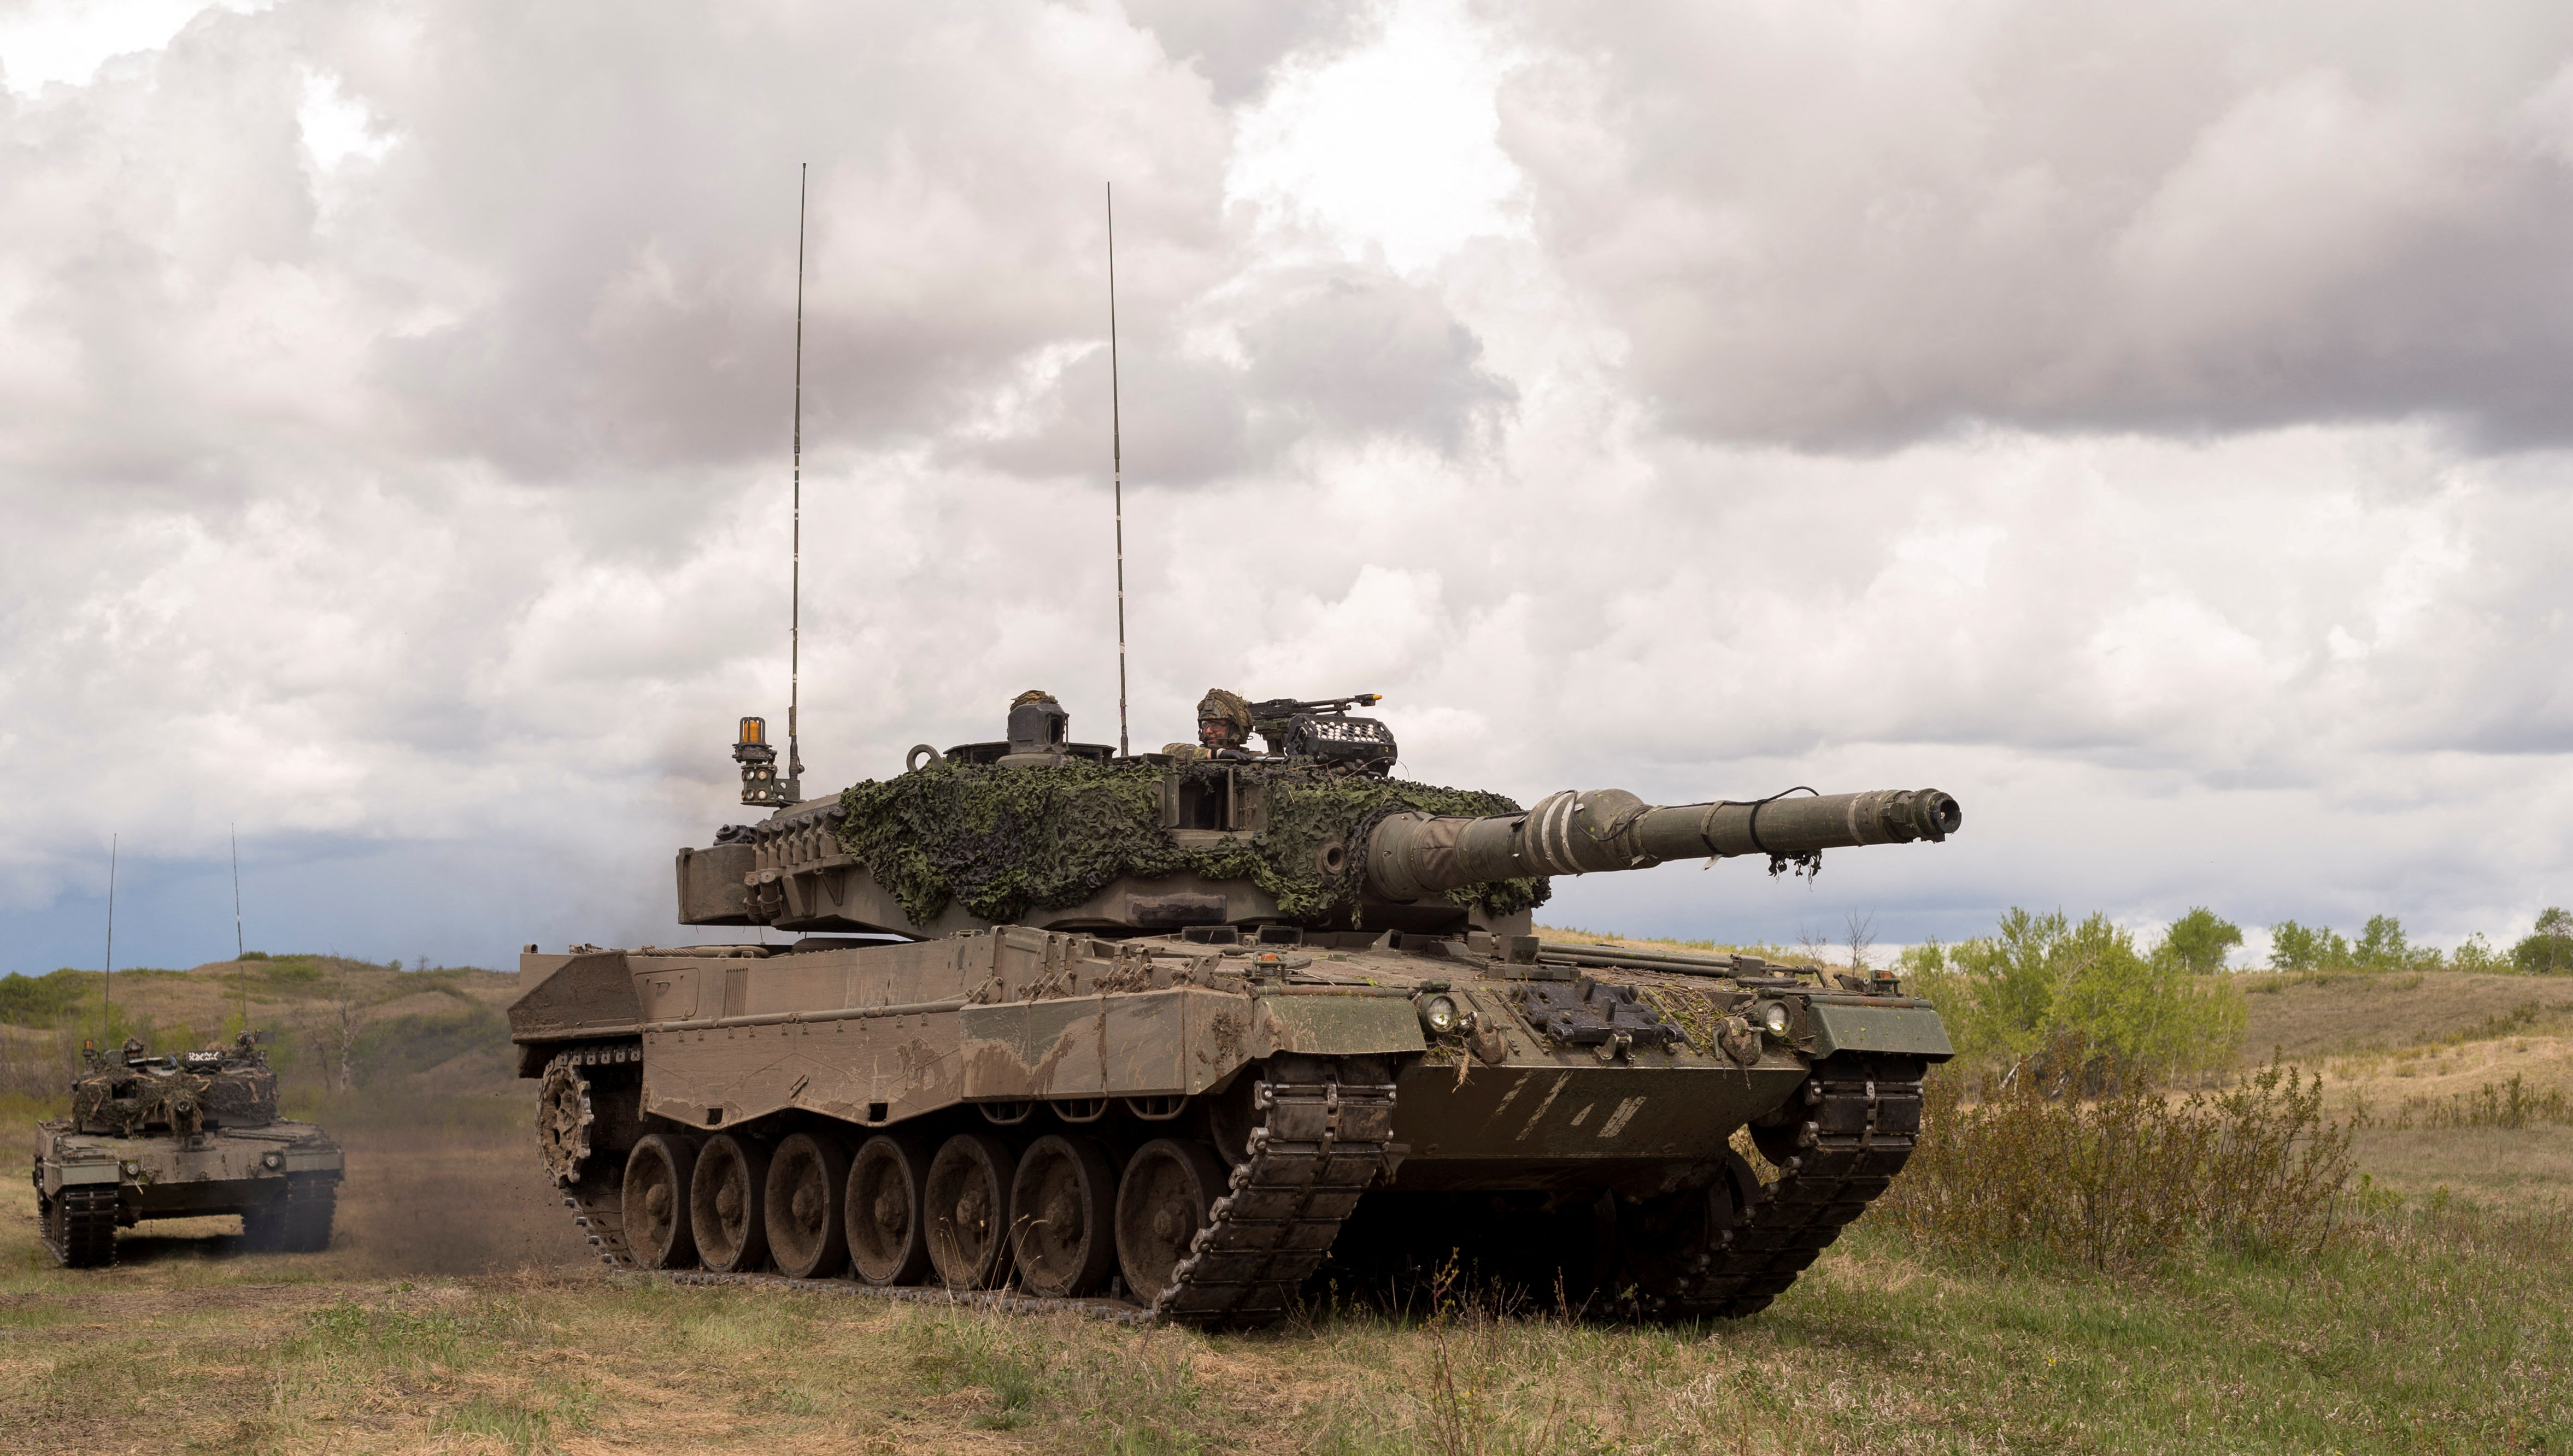 Leopard 2A4 tanks from the Royal Canadian Dragoons C Squadron travel in the Wainwright Garrison training area during Exercise in Wainwright